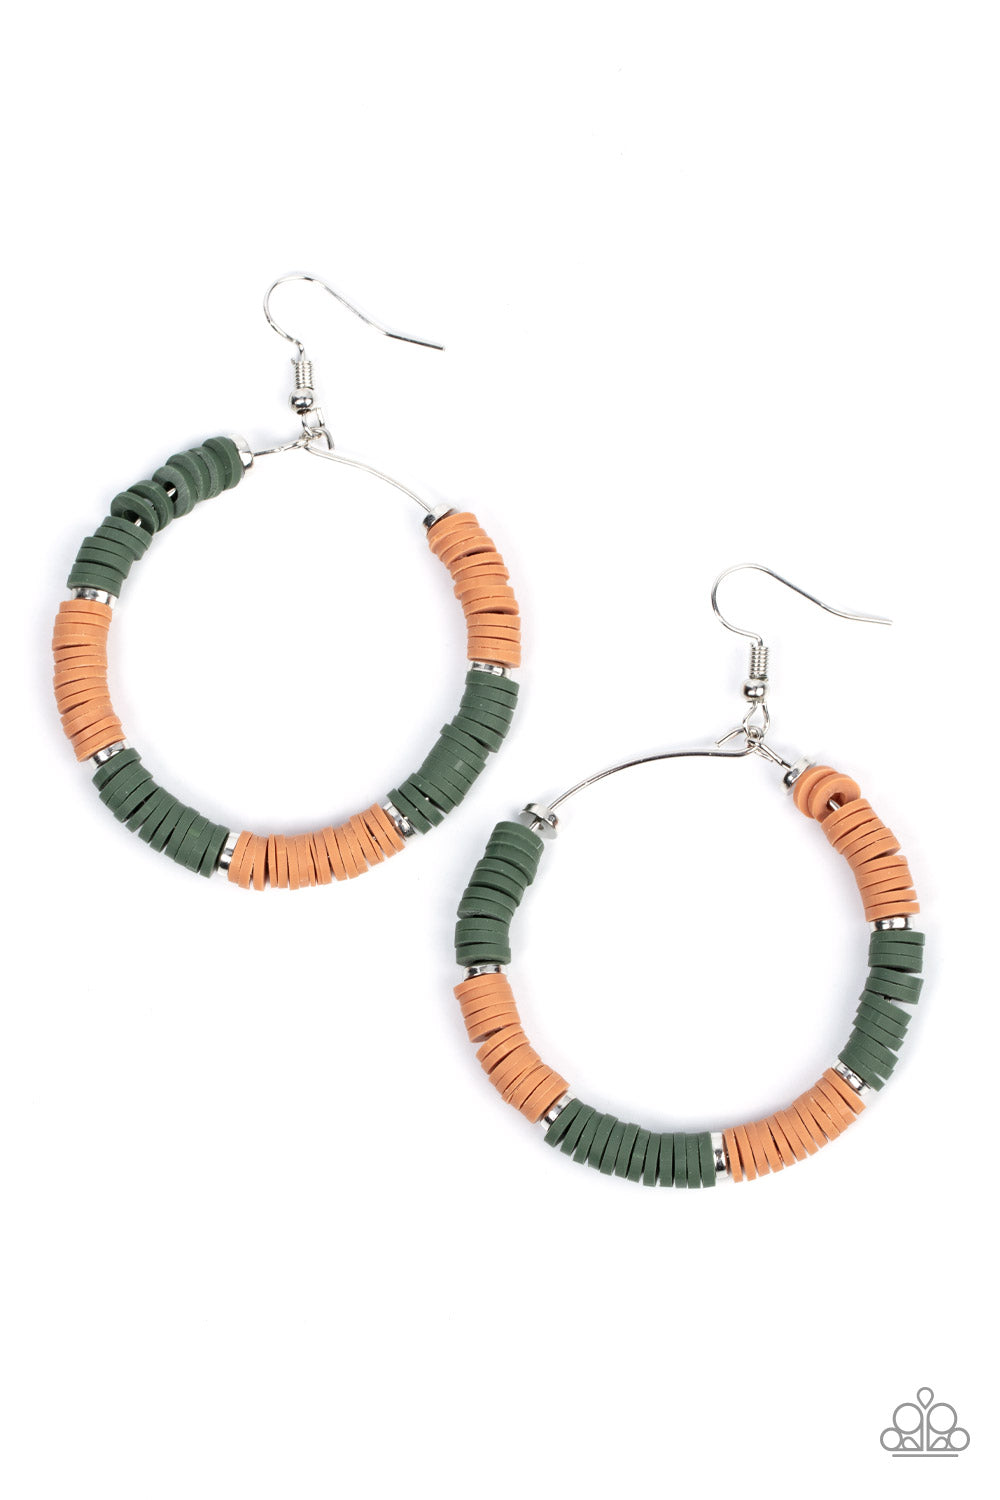 Infused with dainty silver accents, an earthy collection of rubbery green and brown discs are threaded along a dainty silver wire hoop for a colorful look.